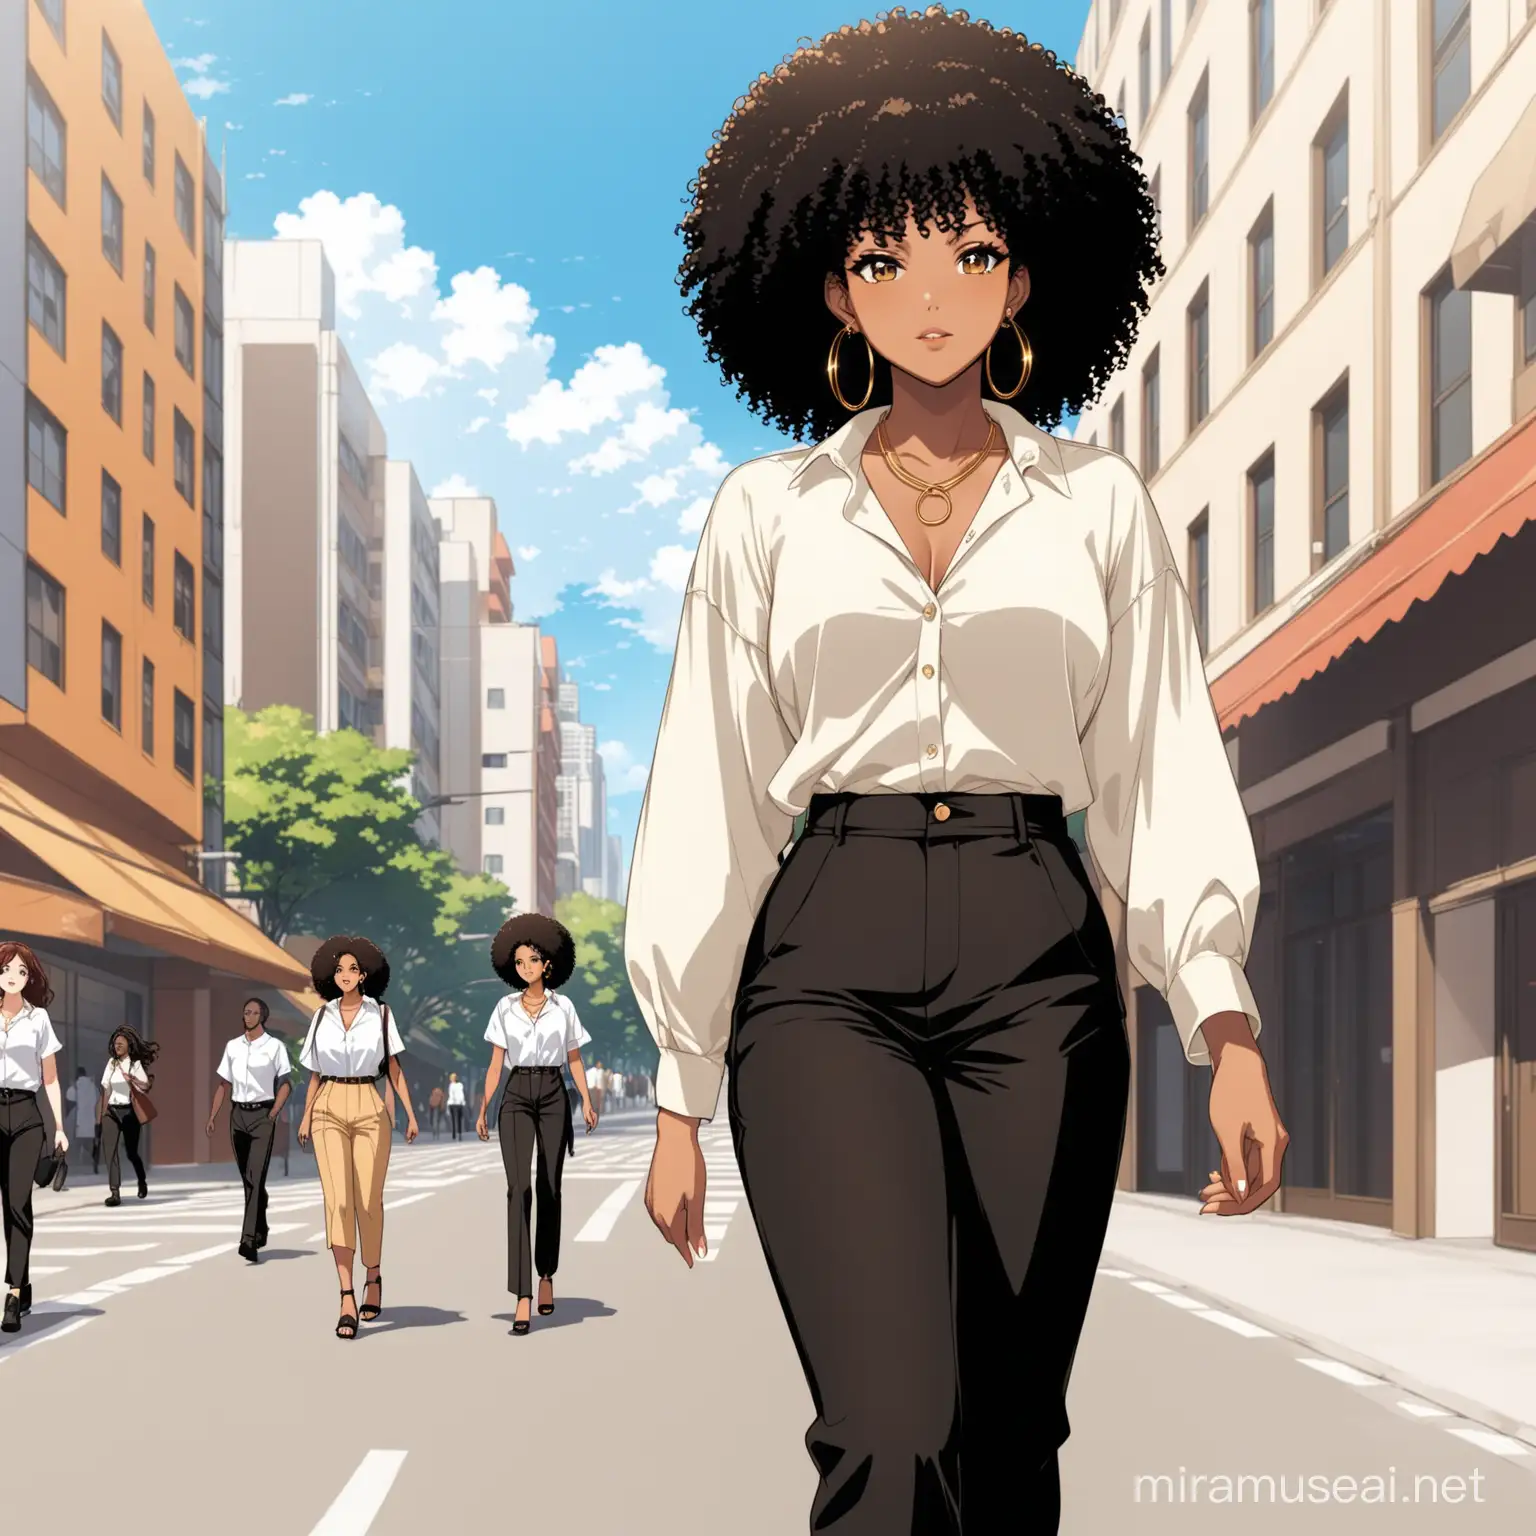 Anime, woman, black woman, kinky hair, afro hair, off-white button-up shirt tucked into high-rise black pants, gold necklace, small gold loop earrings, in town, walking in town